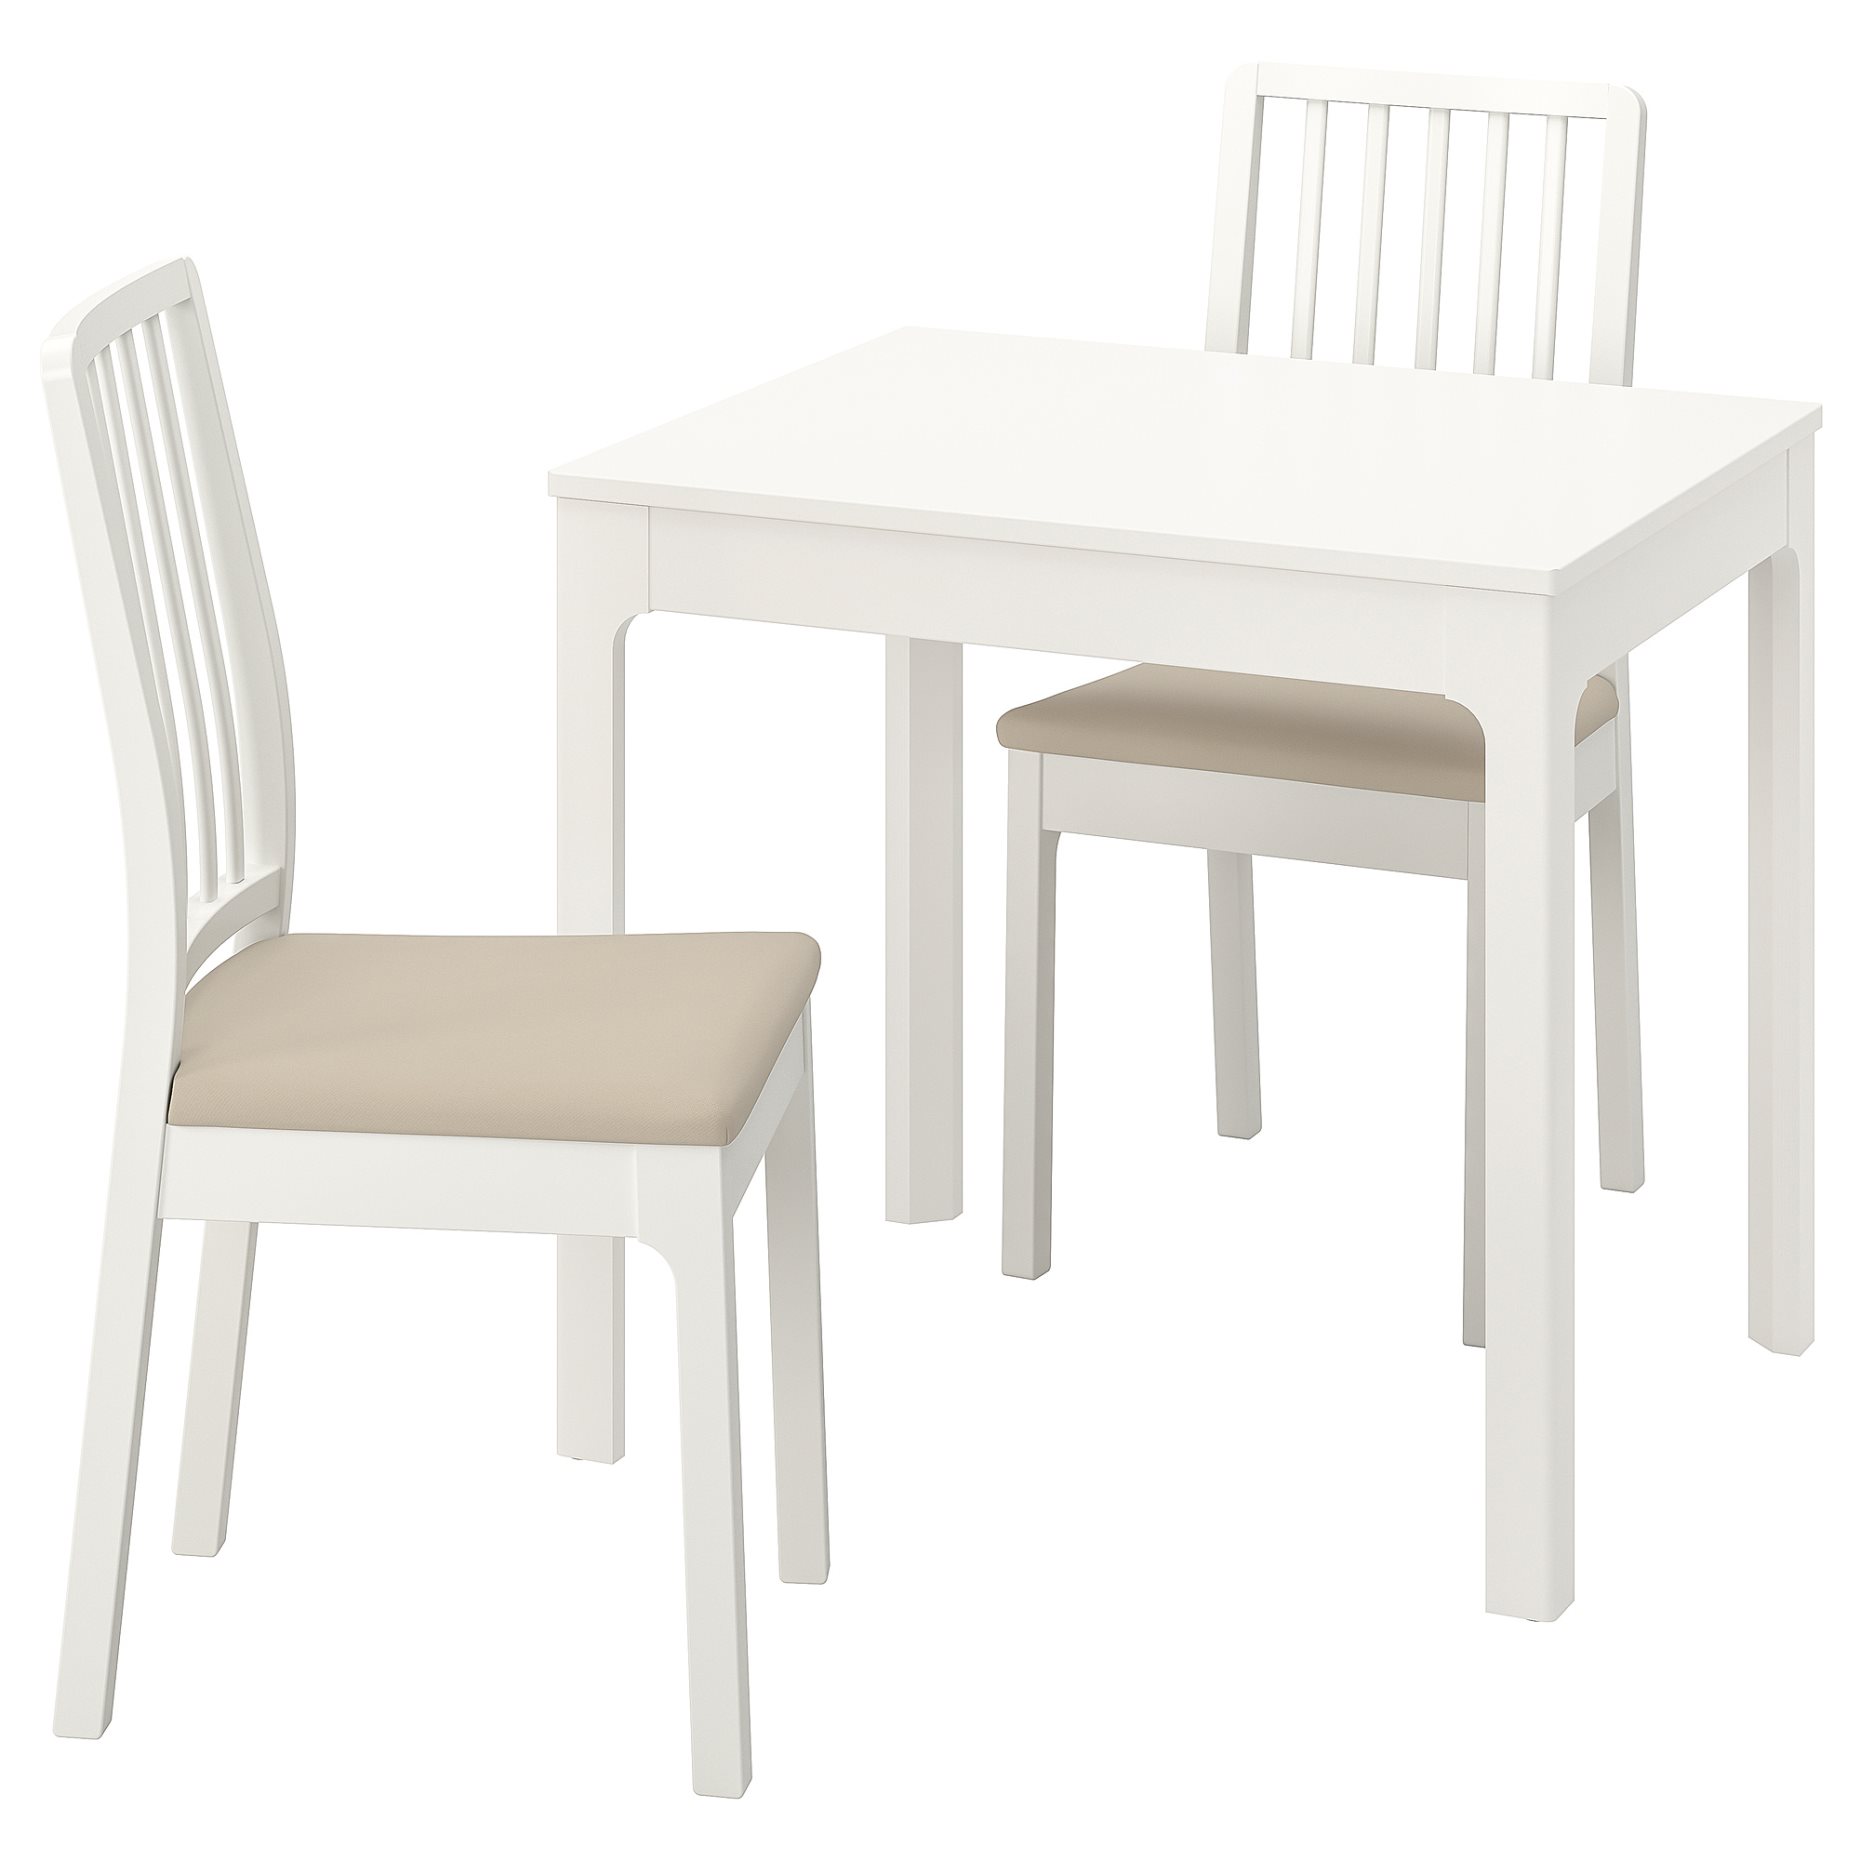 EKEDALEN/EKEDALEN, table and 2 chairs, 80/120 cm, 394.294.06